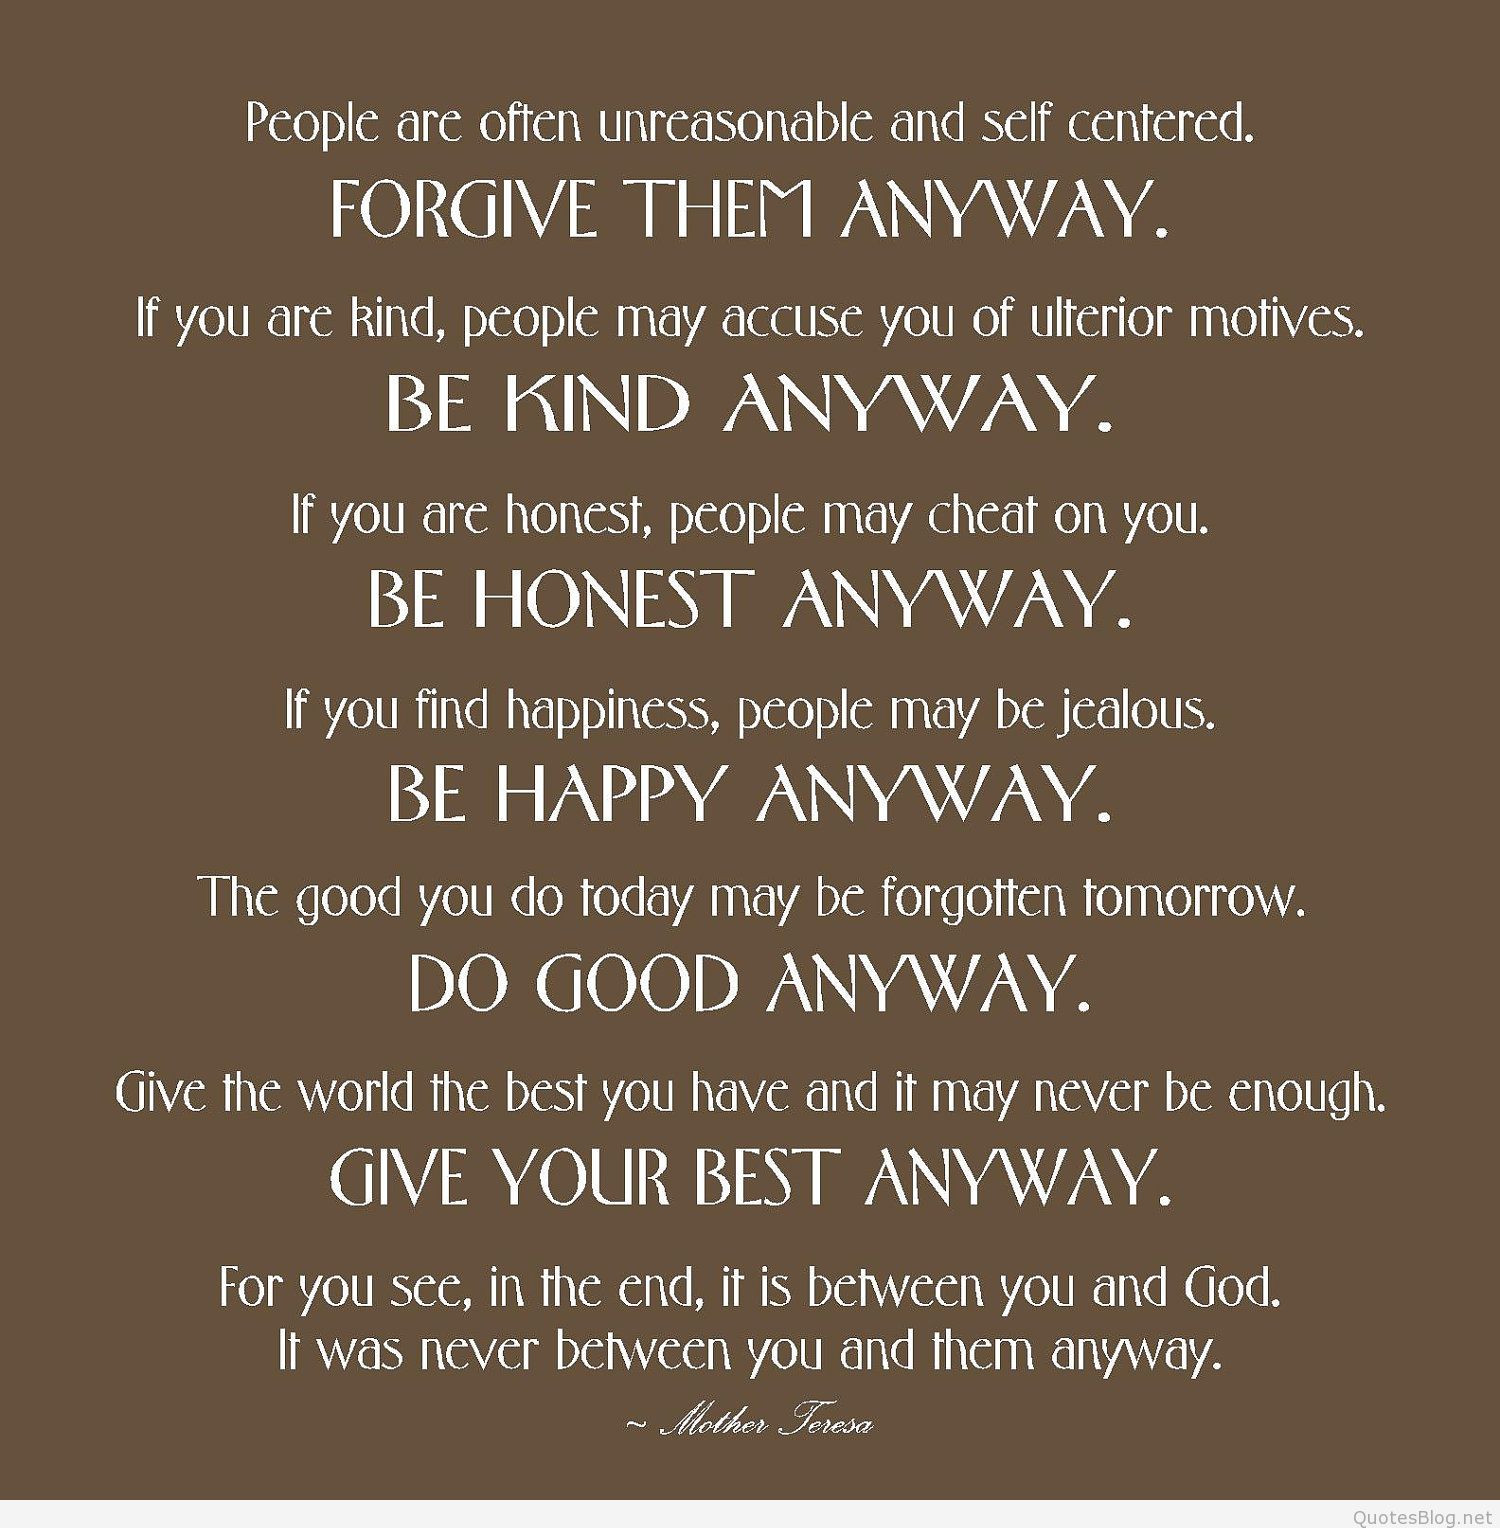 Mother Teresa Quotes On Life Do It Anyway
 Mother Theresa Brainy Quotes and sayings